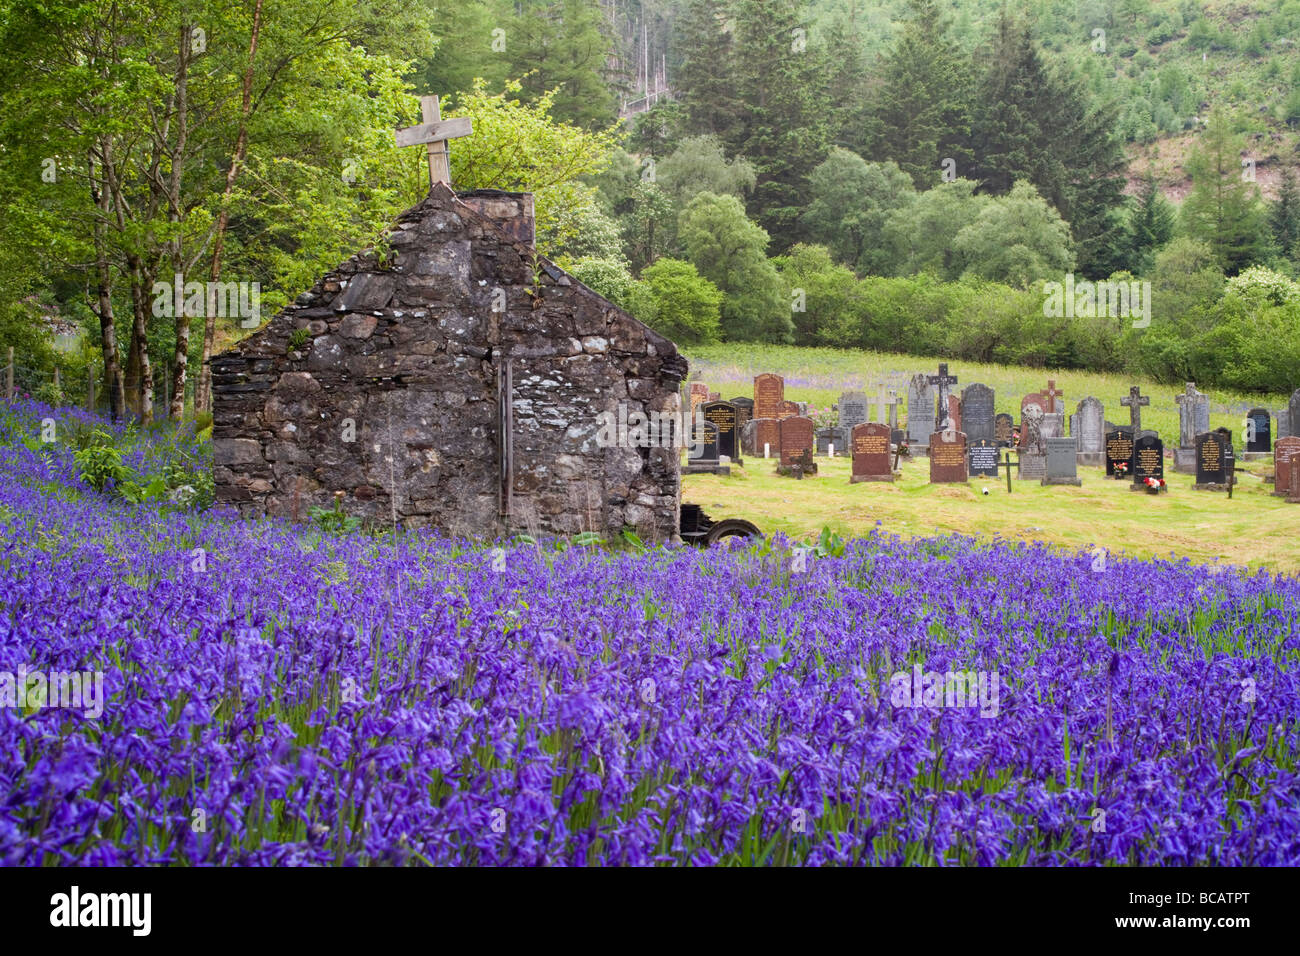 Field of Bluebells in front of St John's Church, Ballachulish, Scotland. Stock Photo